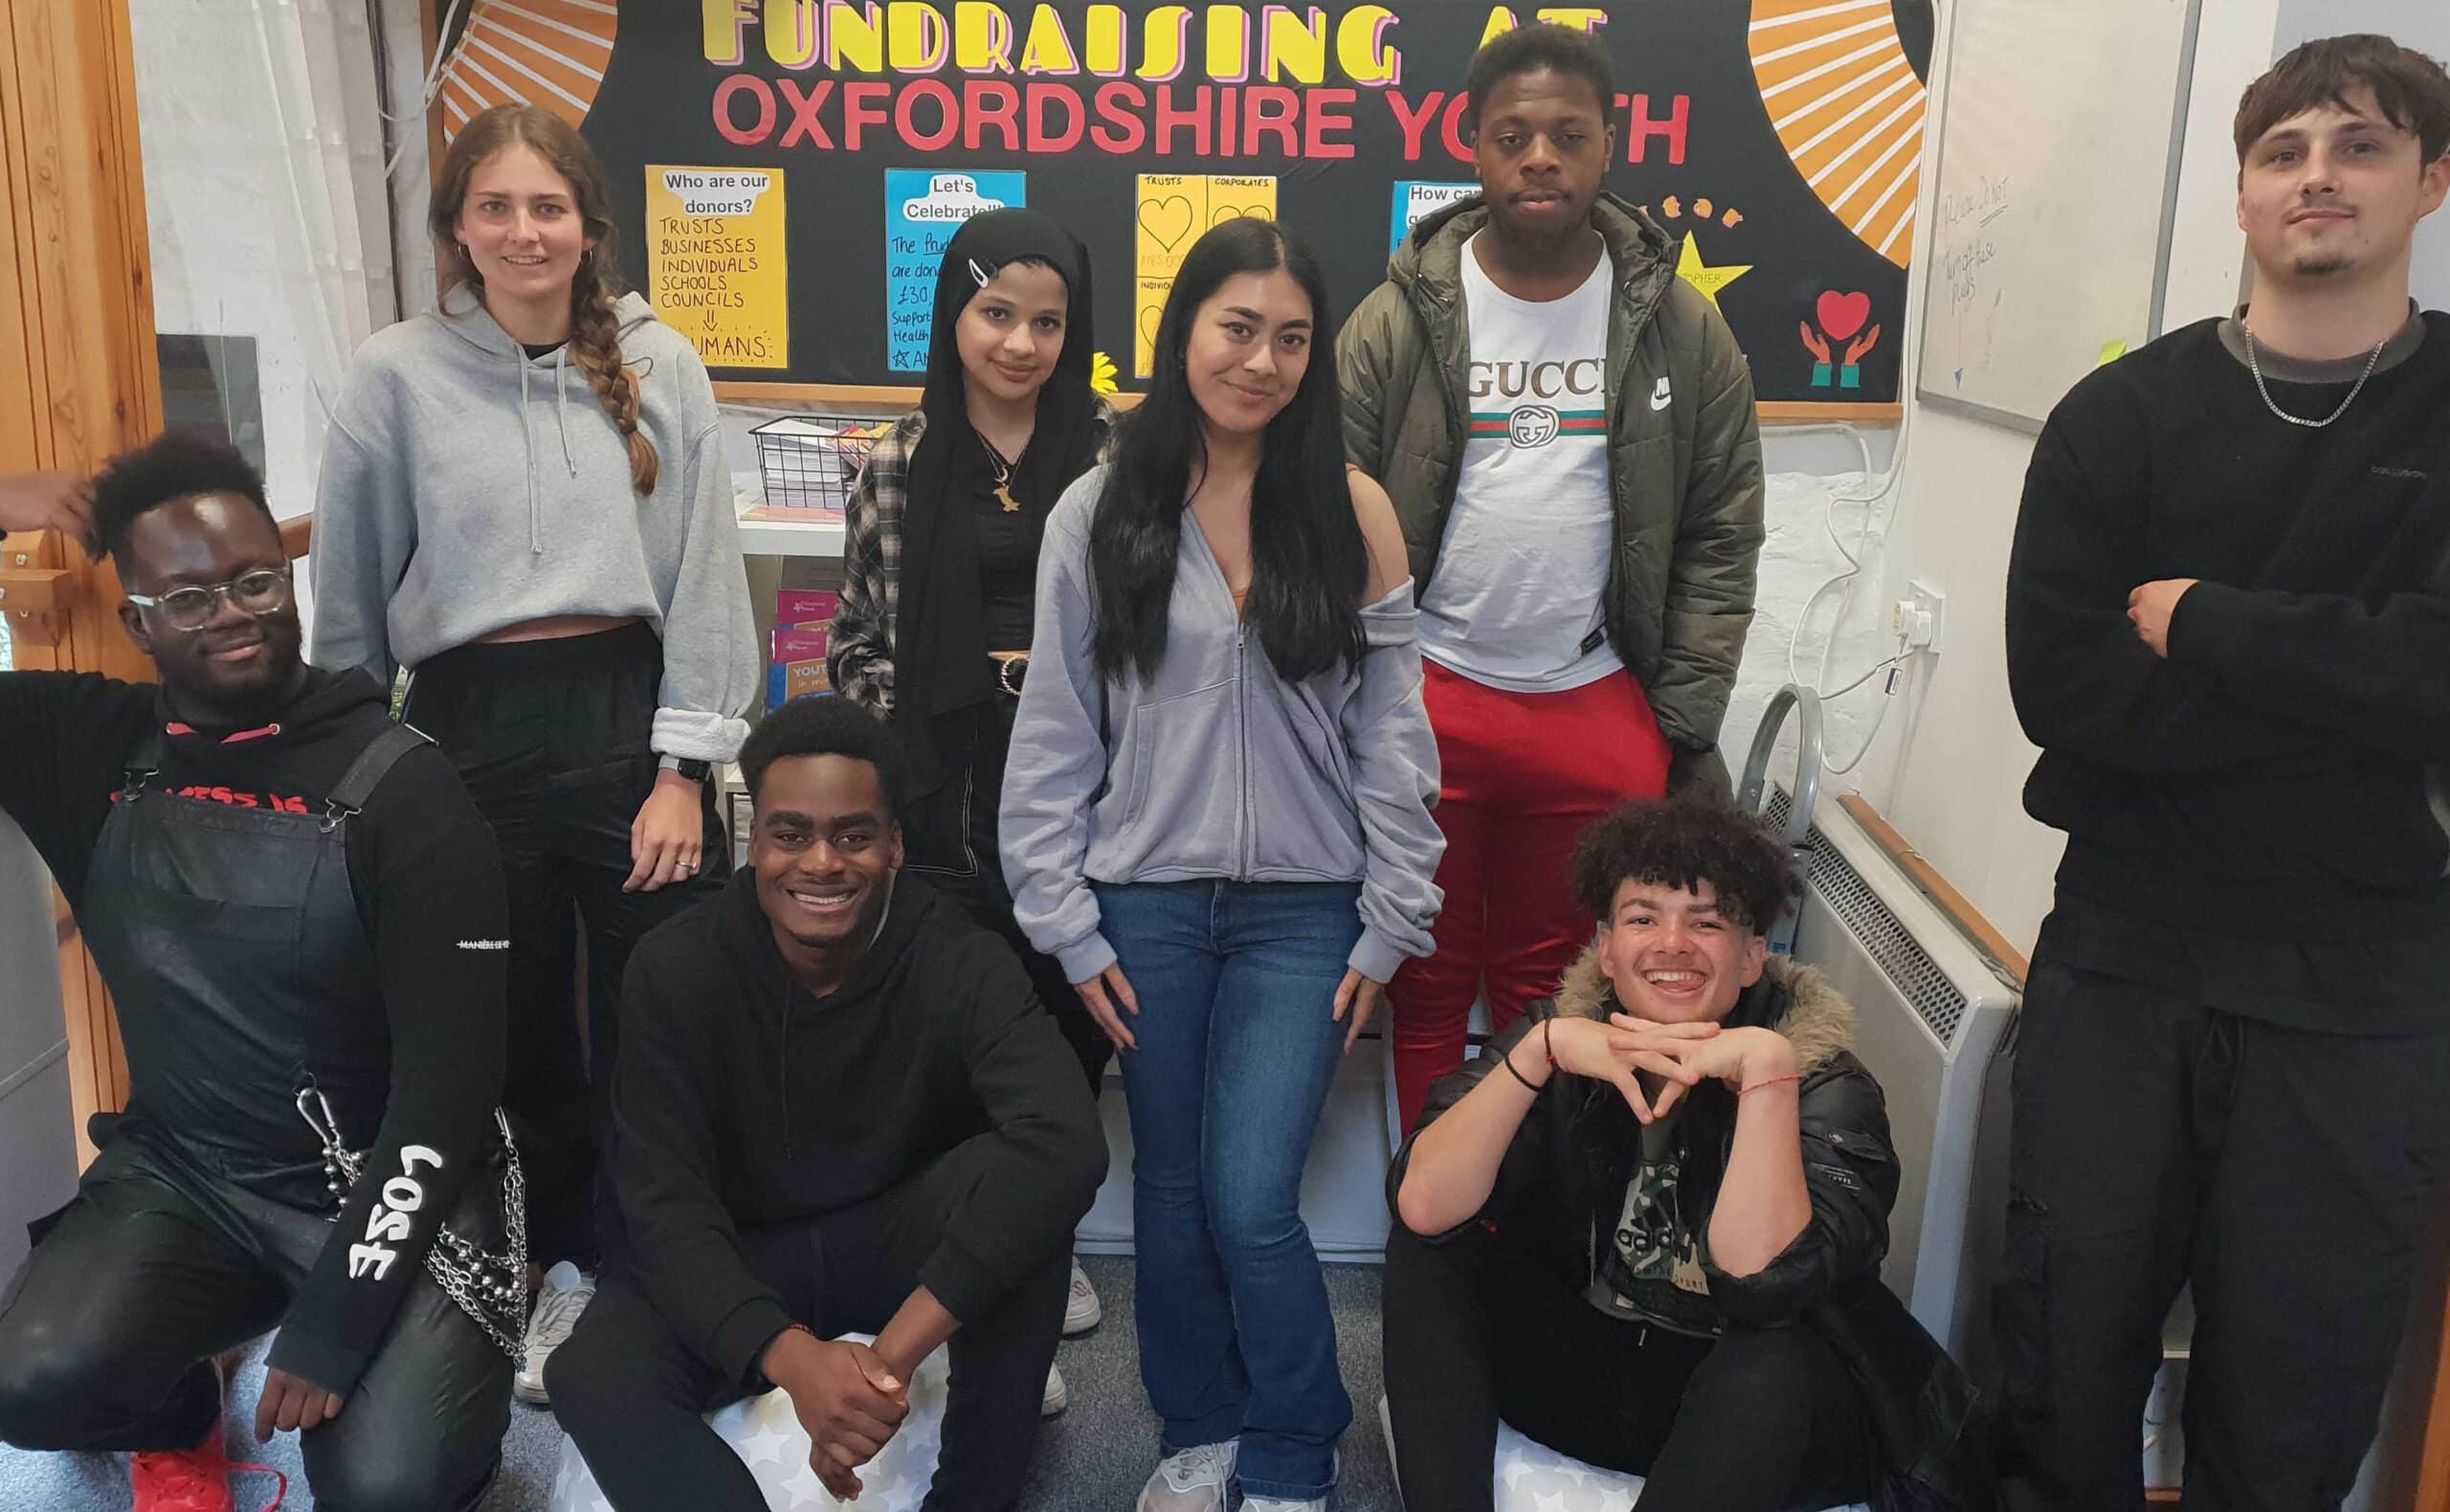 The Youth Awards committee stood together posing and smiling for a photo in front of a colourful fundraising board. From left to right, there is a black male kneeled down, a caucasian female stood up, a black male sat down, a south asian female stood behind him, a south asian female stood in front of her, a black male stood to the right of her, a black and white mixed male sat in the front and a white male stood at the right hand side.